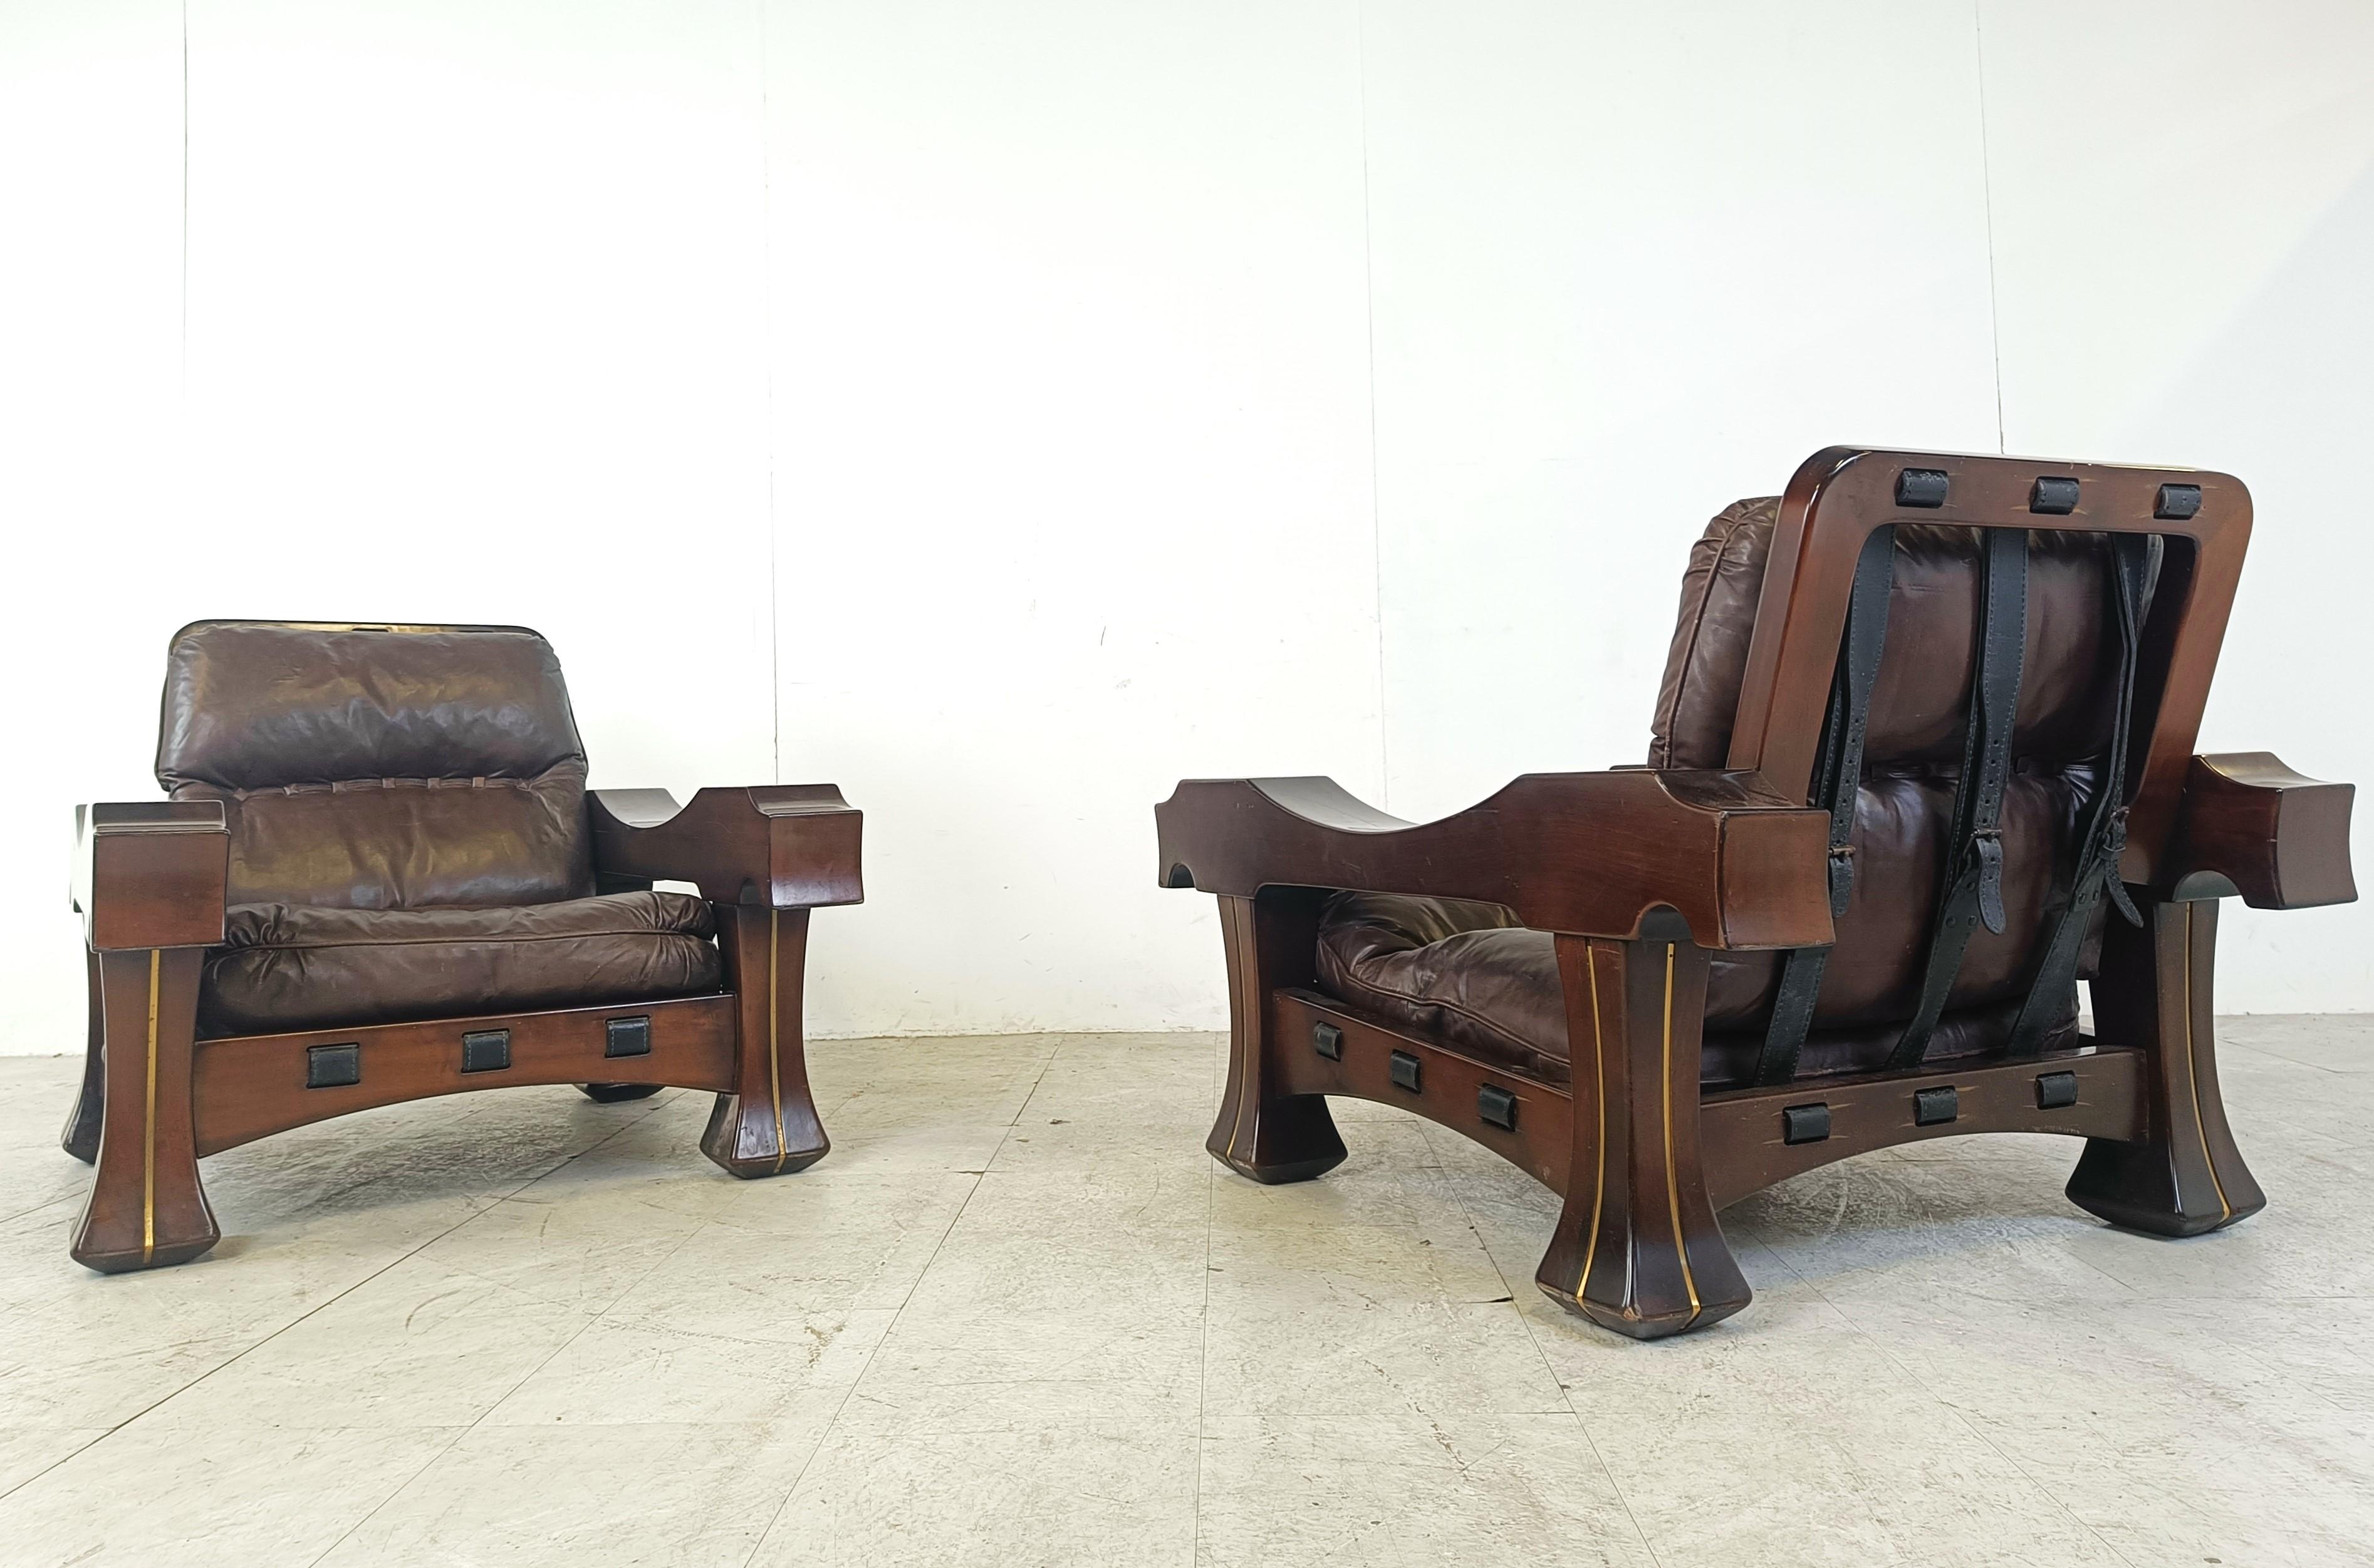 Pair of Ussaro model armchairs by Luciano Frigerio, 1960s For Sale 2